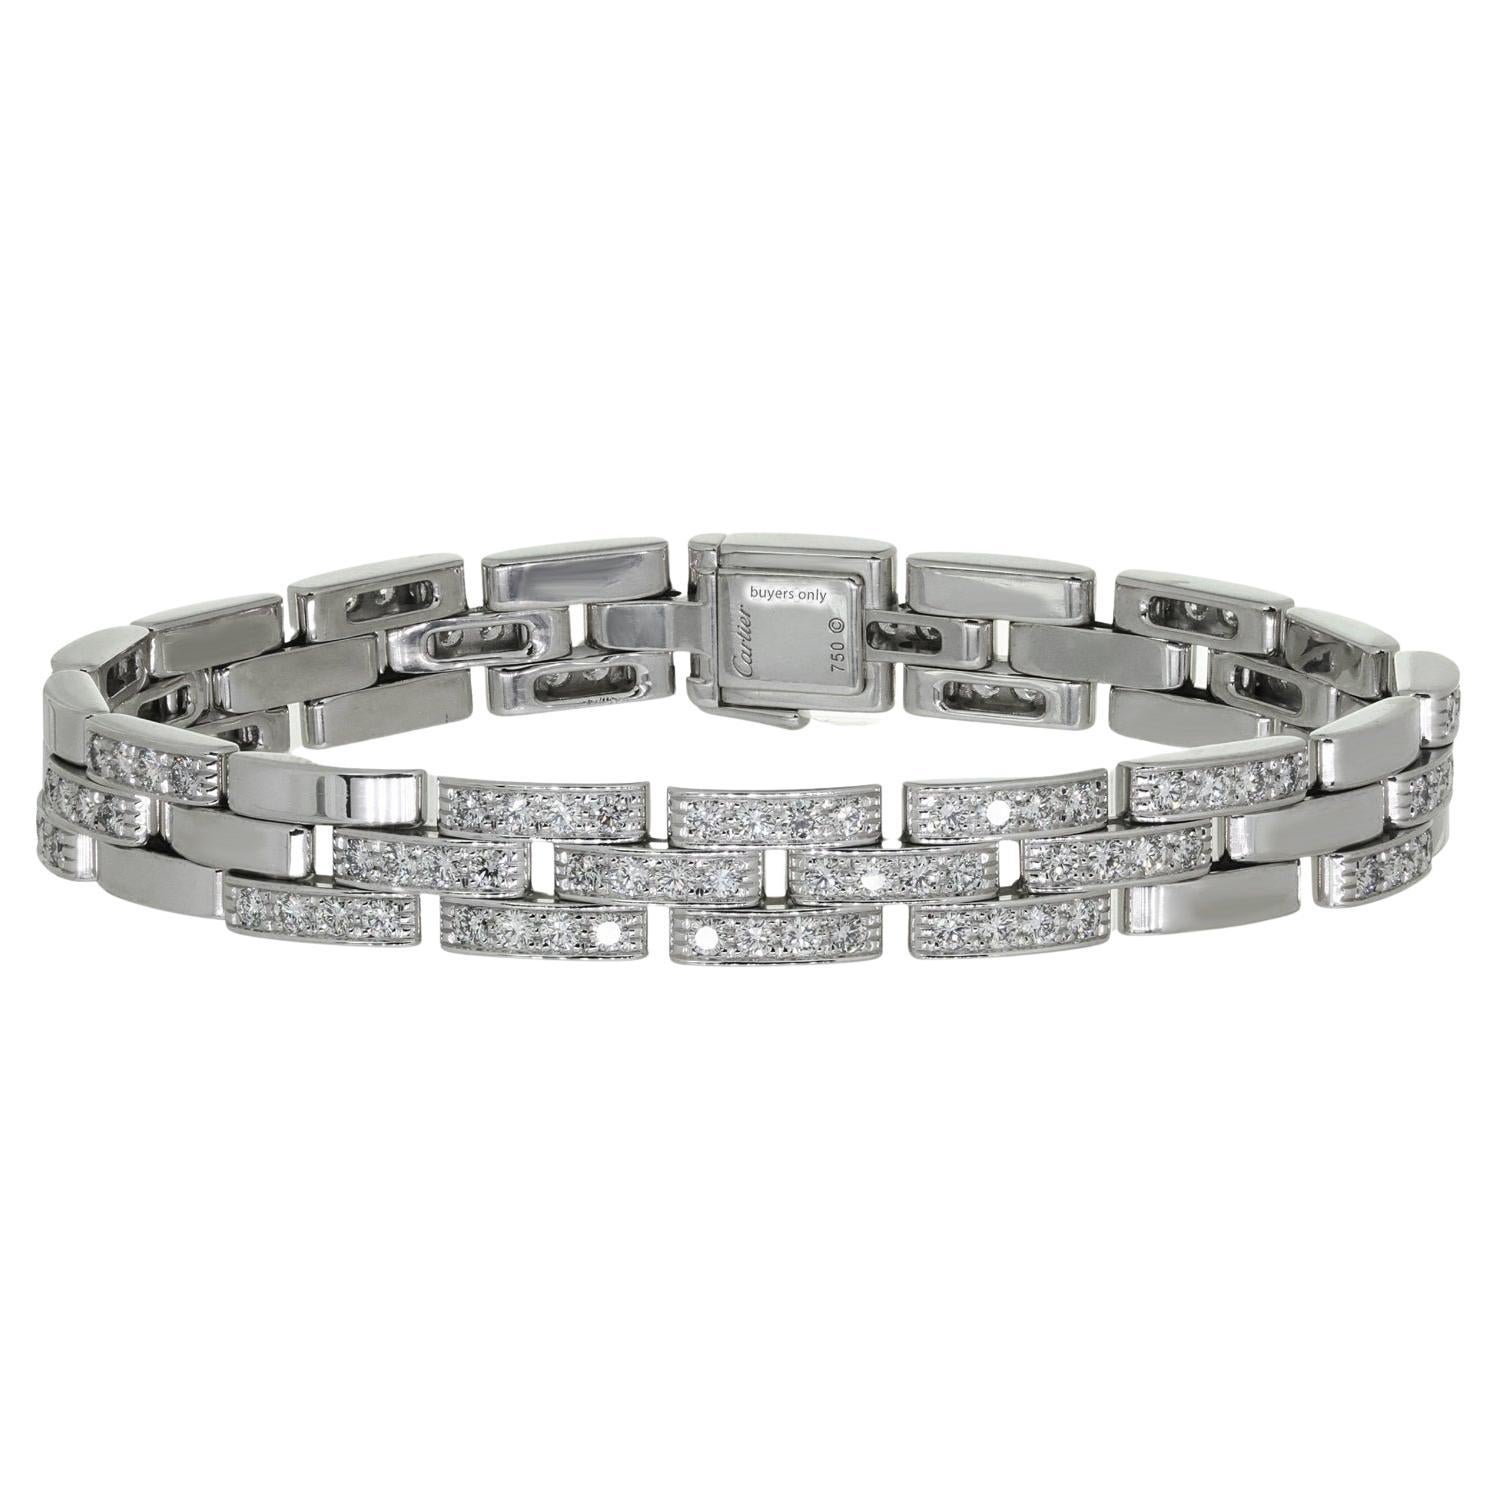 CARTIER Maillon Panthere Diamond White Gold Bracelet For Sale